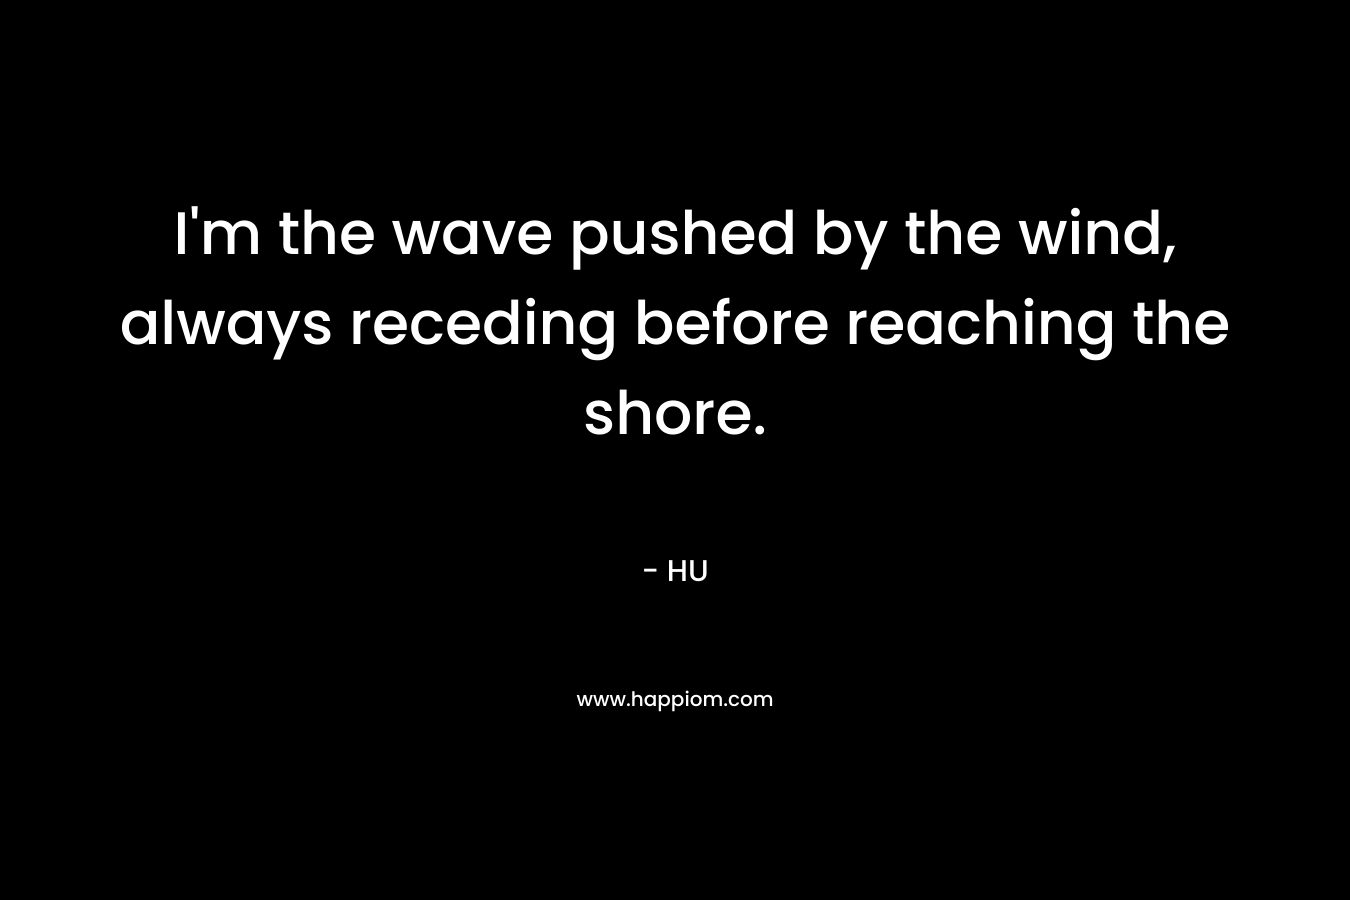 I'm the wave pushed by the wind, always receding before reaching the shore.